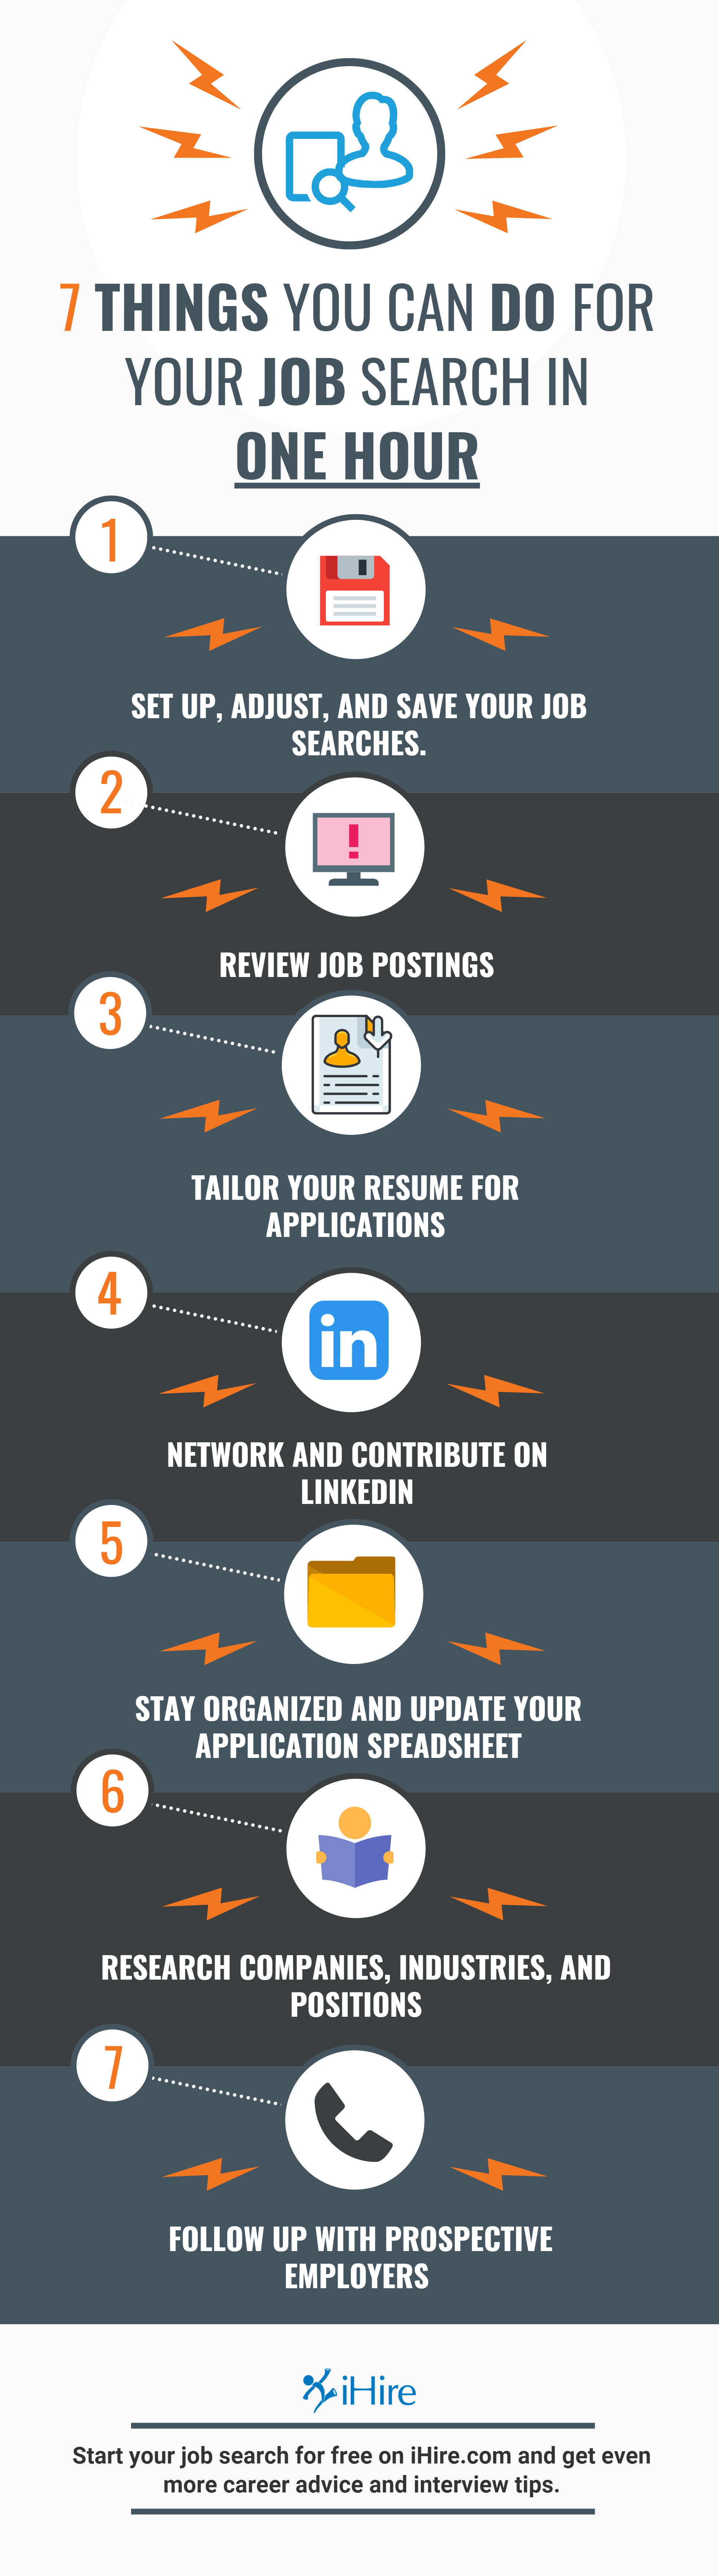 7 things you can do for your job search in one hour infographic